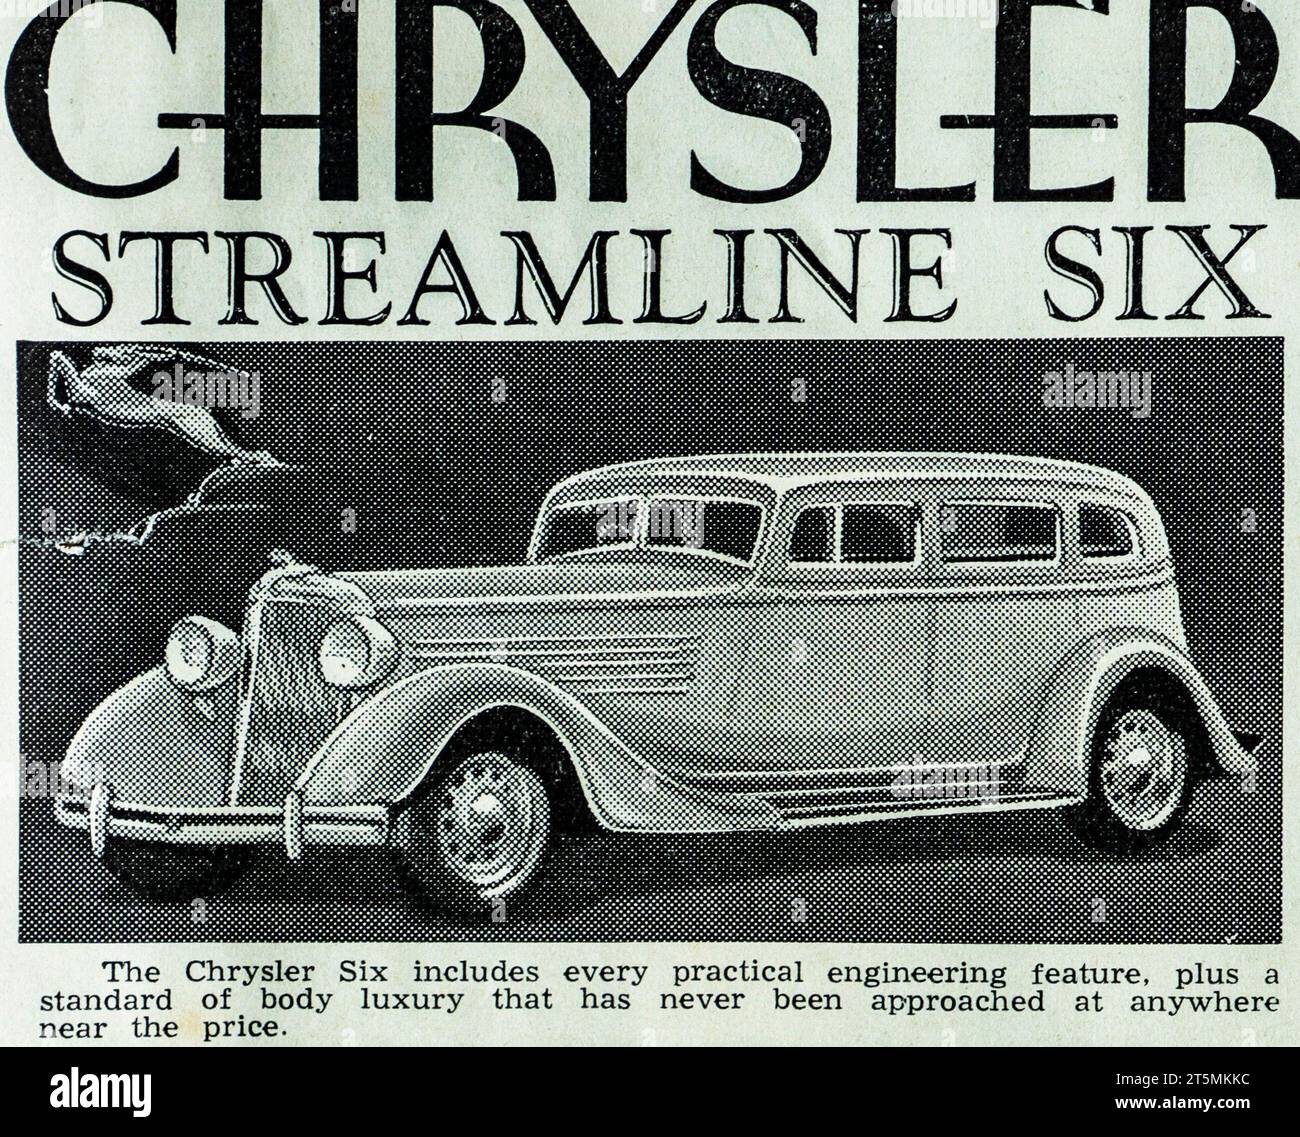 A 1934 Australian advertisement for The Chrysler Plymouth Six-‘the most complete and biggest car in the low priced field’. The advertisement was placed by Lanes Motors 89 Exhibition Street, Melbourne. Stock Photo